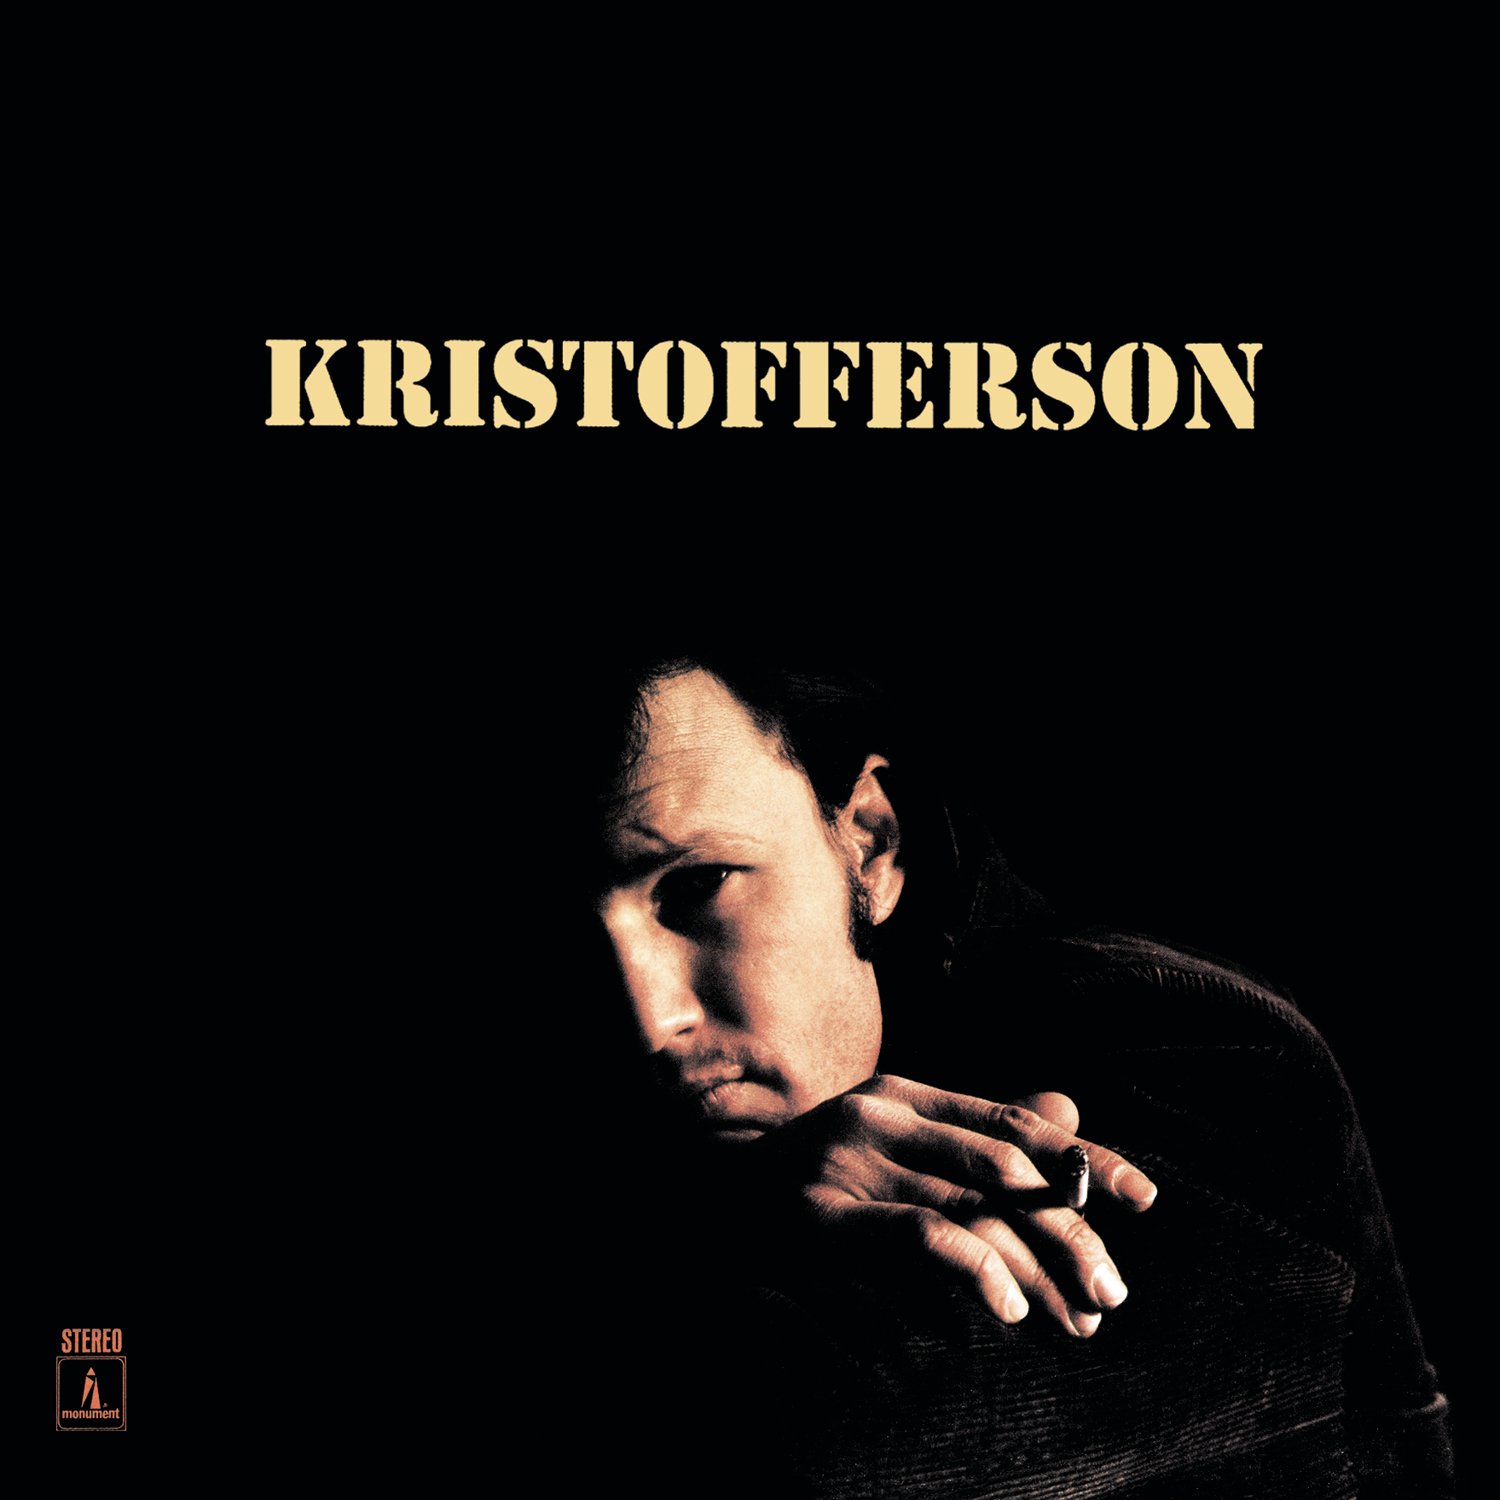 From Janitor to Legend: The Kristofferson Chronicles